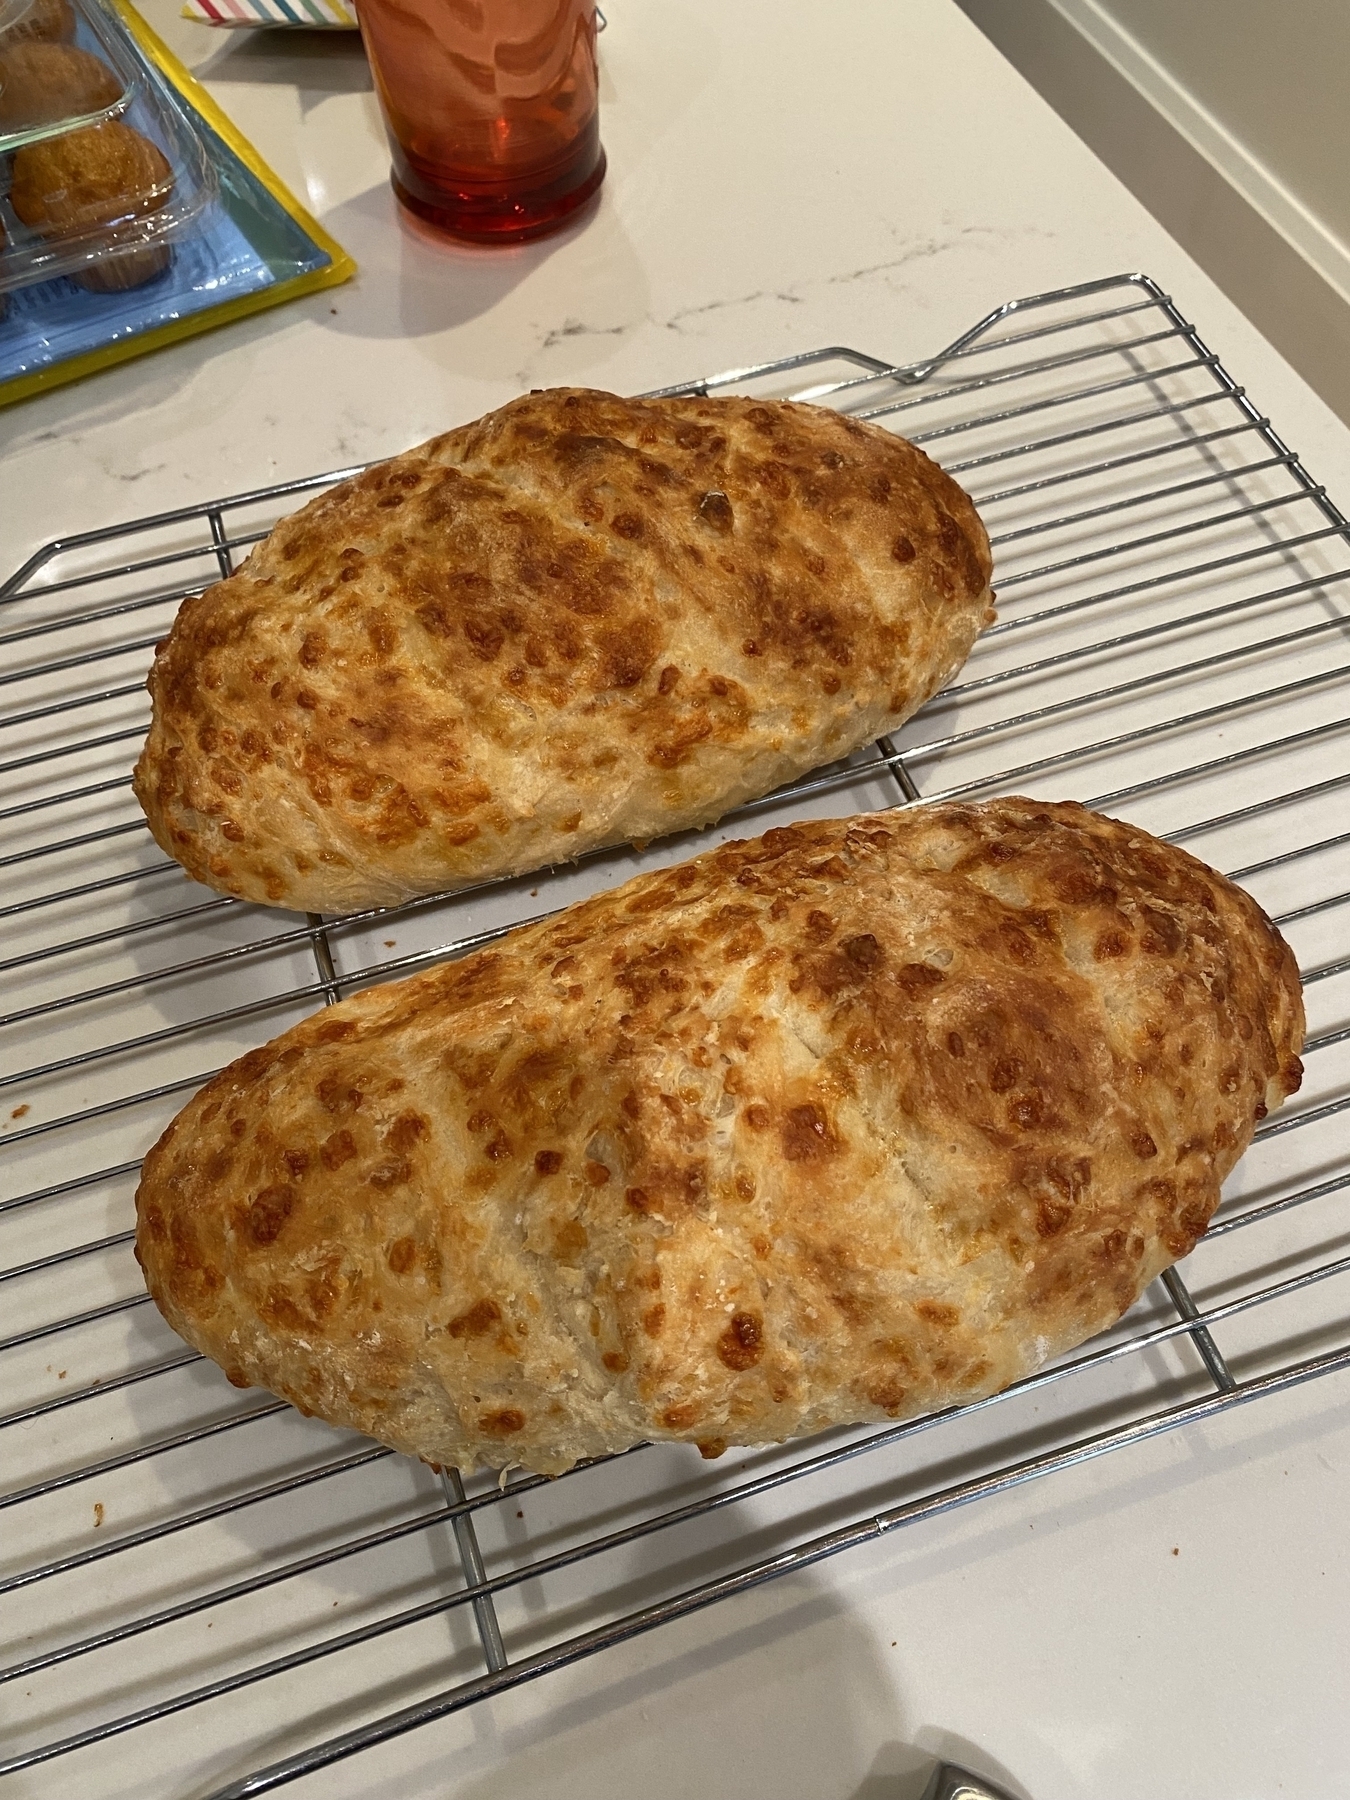 Two whole loaves of cheese bread